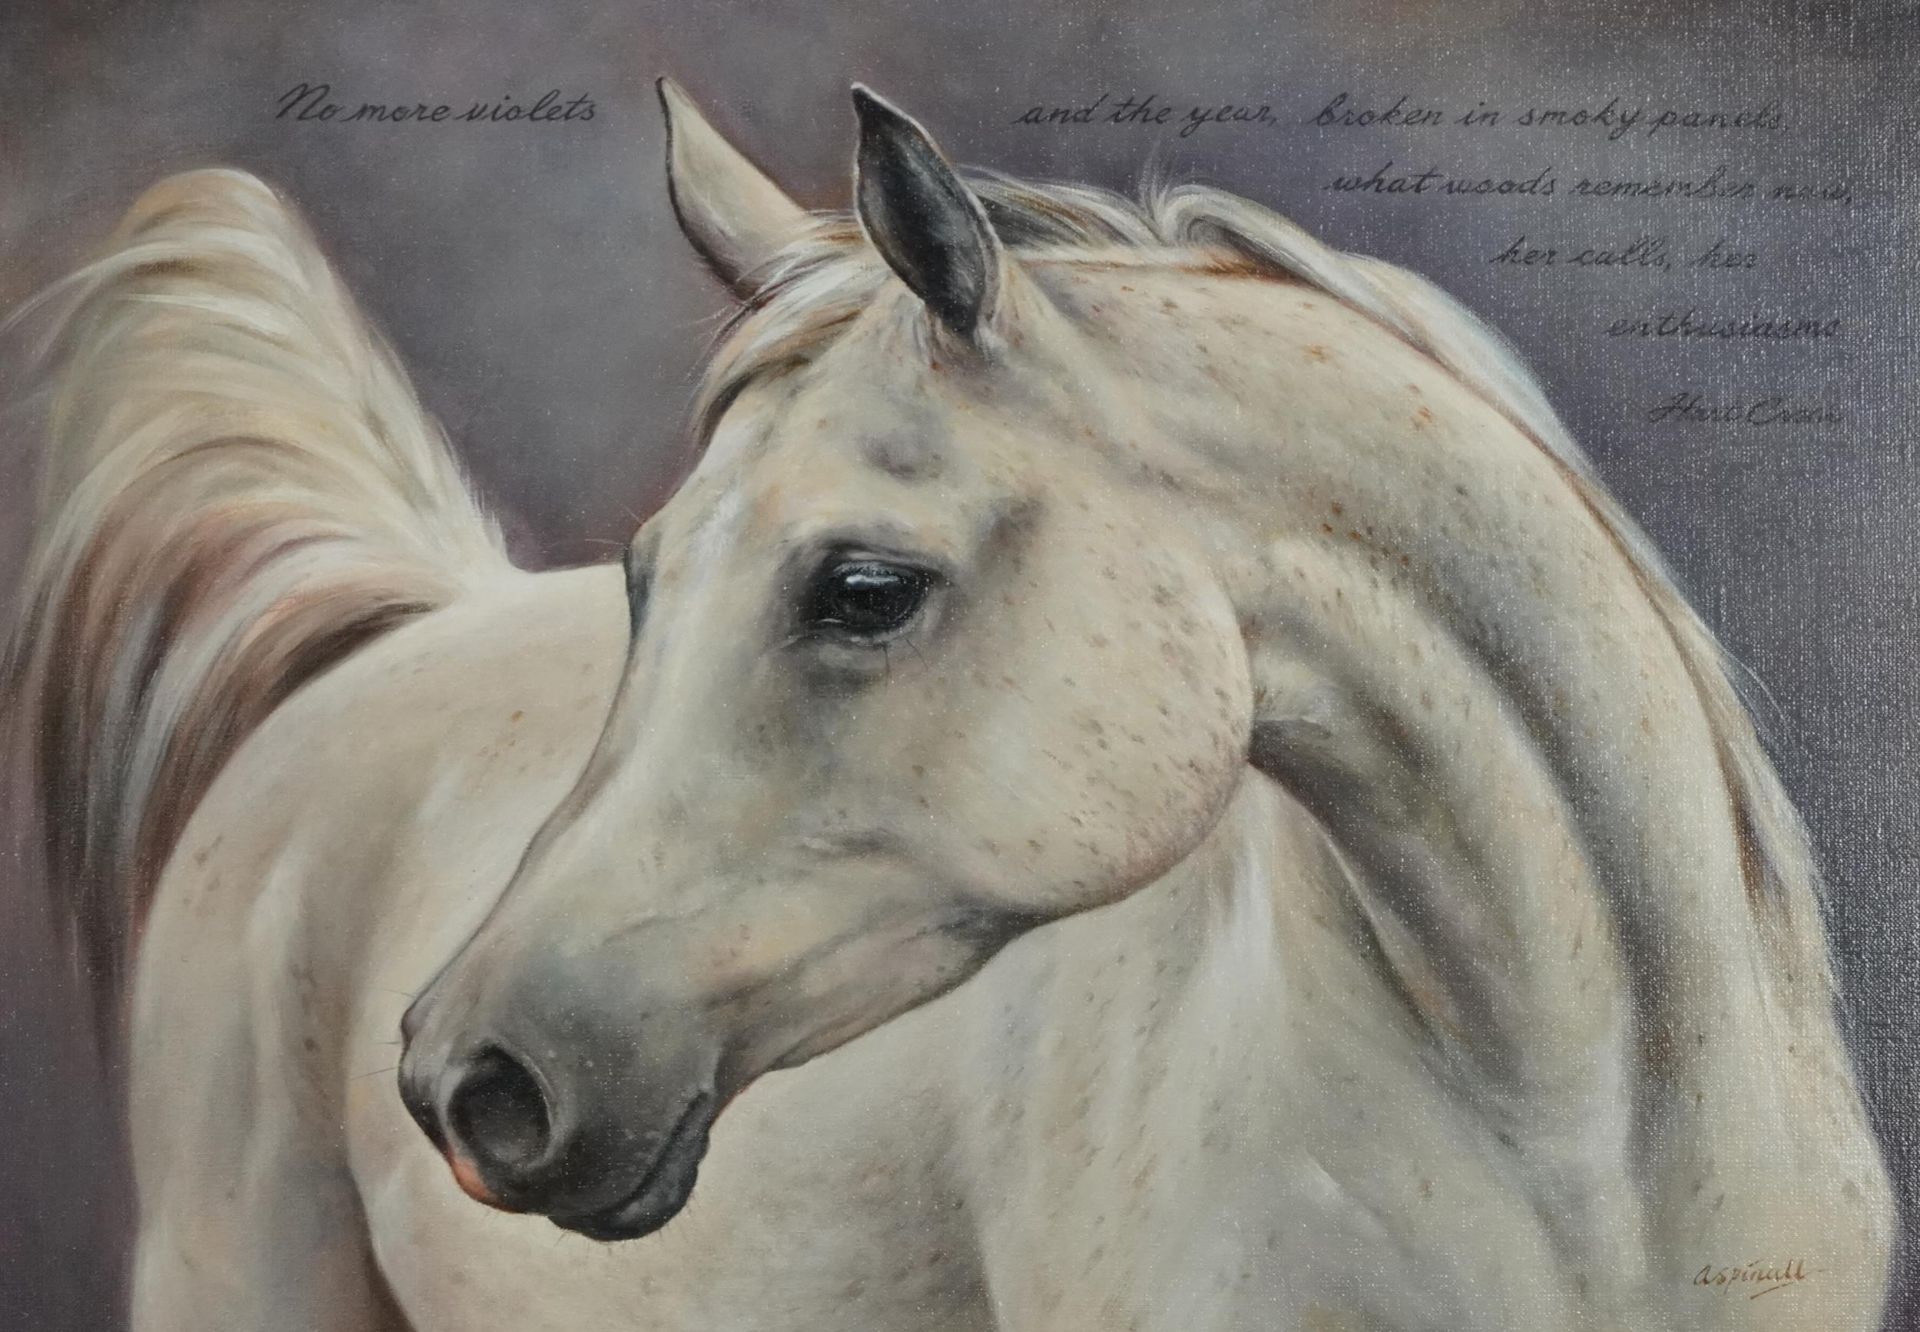 Sarah Aspinall - White horse, equestrian interest oil on canvas, mounted and framed, 48.5cm x 38.5cm